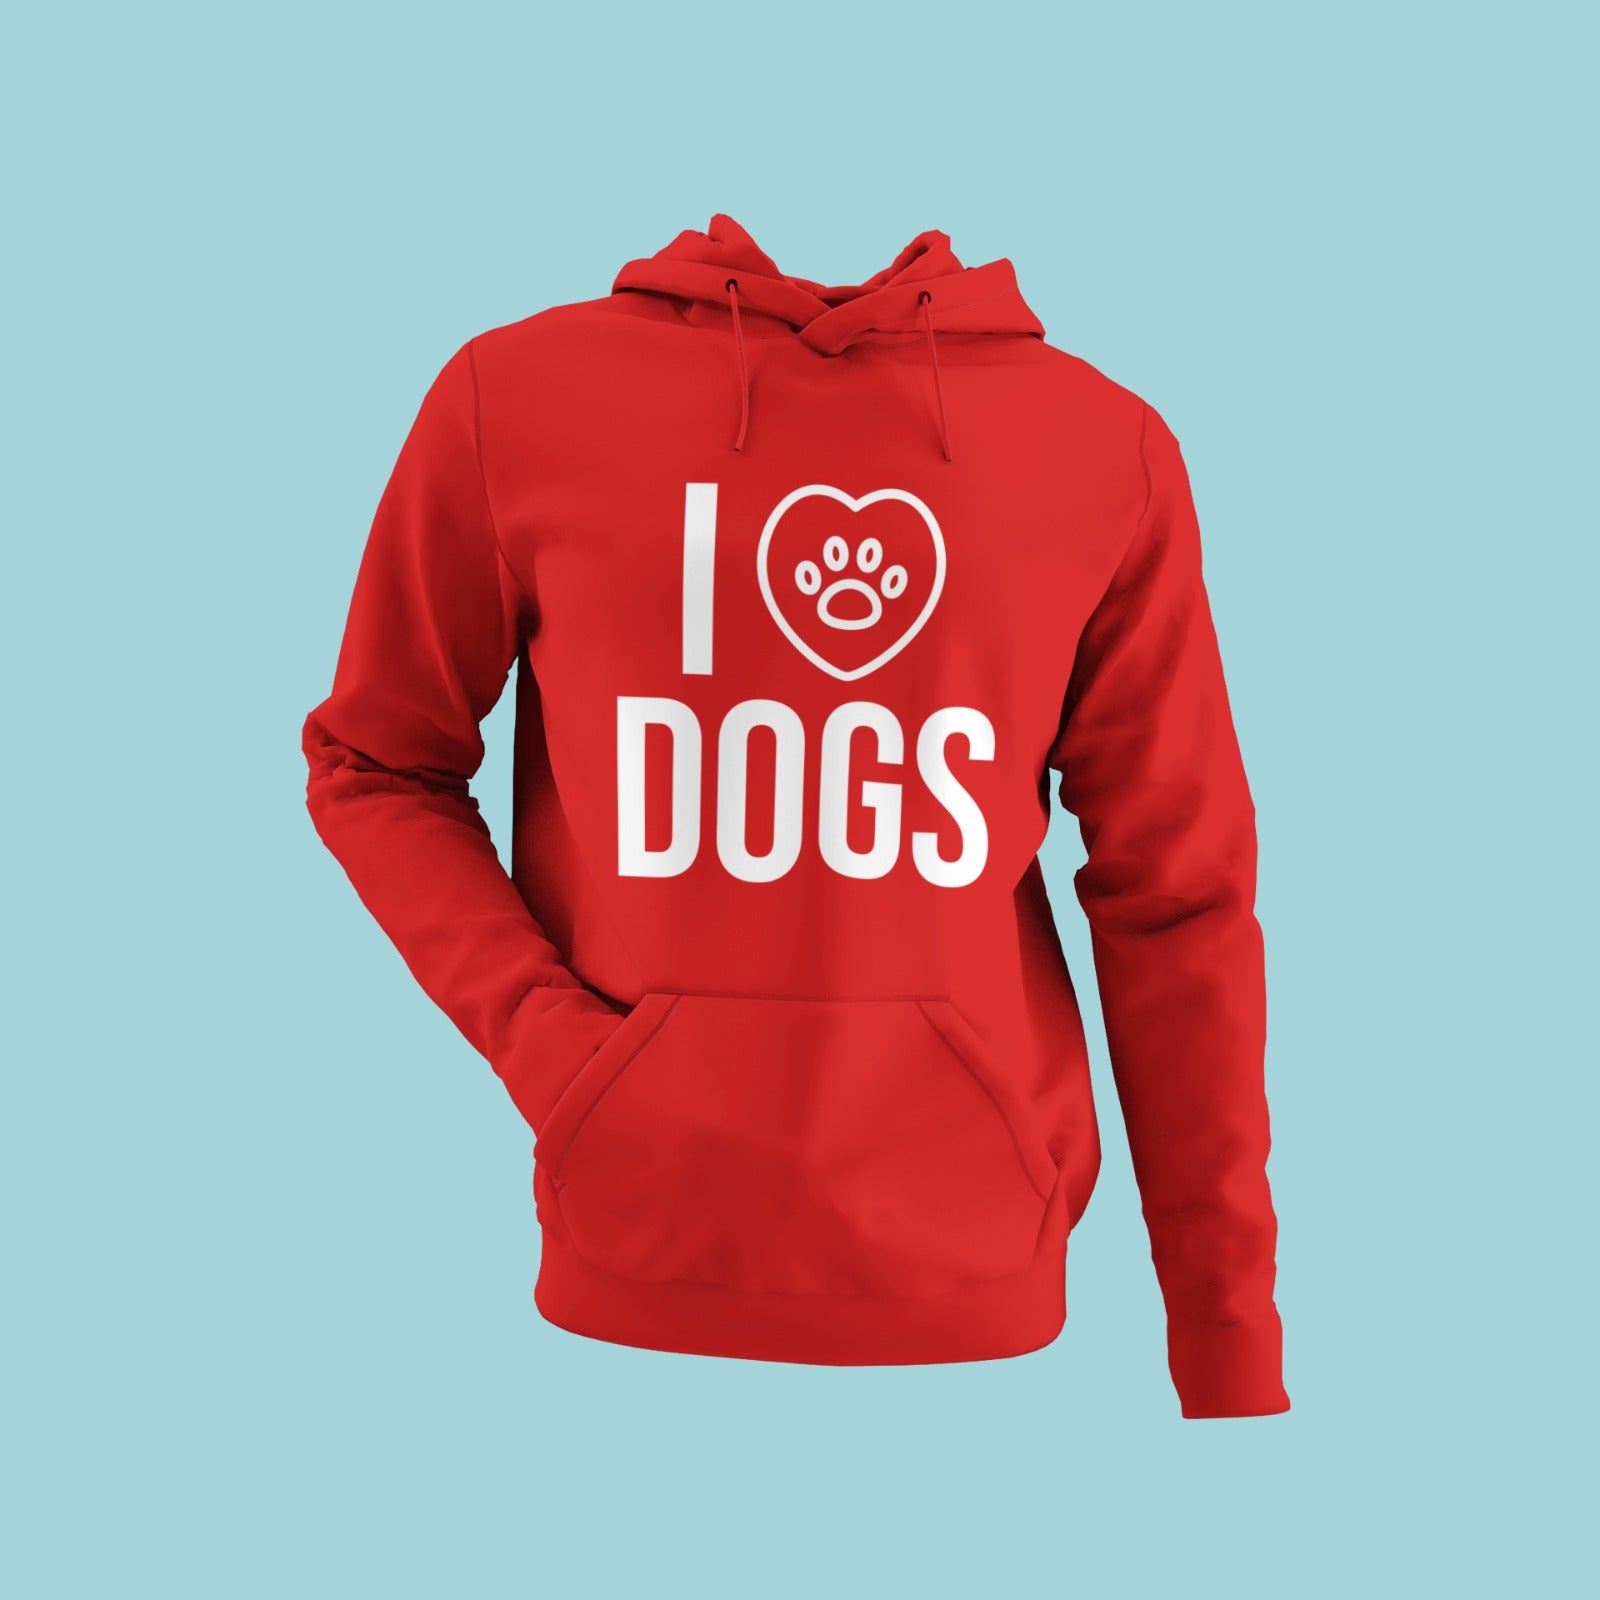 Show your love for dogs with this stylish red hoodie featuring the message "I ♥ dogs" with a paw inside the heart. Made with high-quality materials, this hoodie is sure to keep you warm and comfortable while showing off your love for our furry friends. Order now and make a statement with this timeless design.